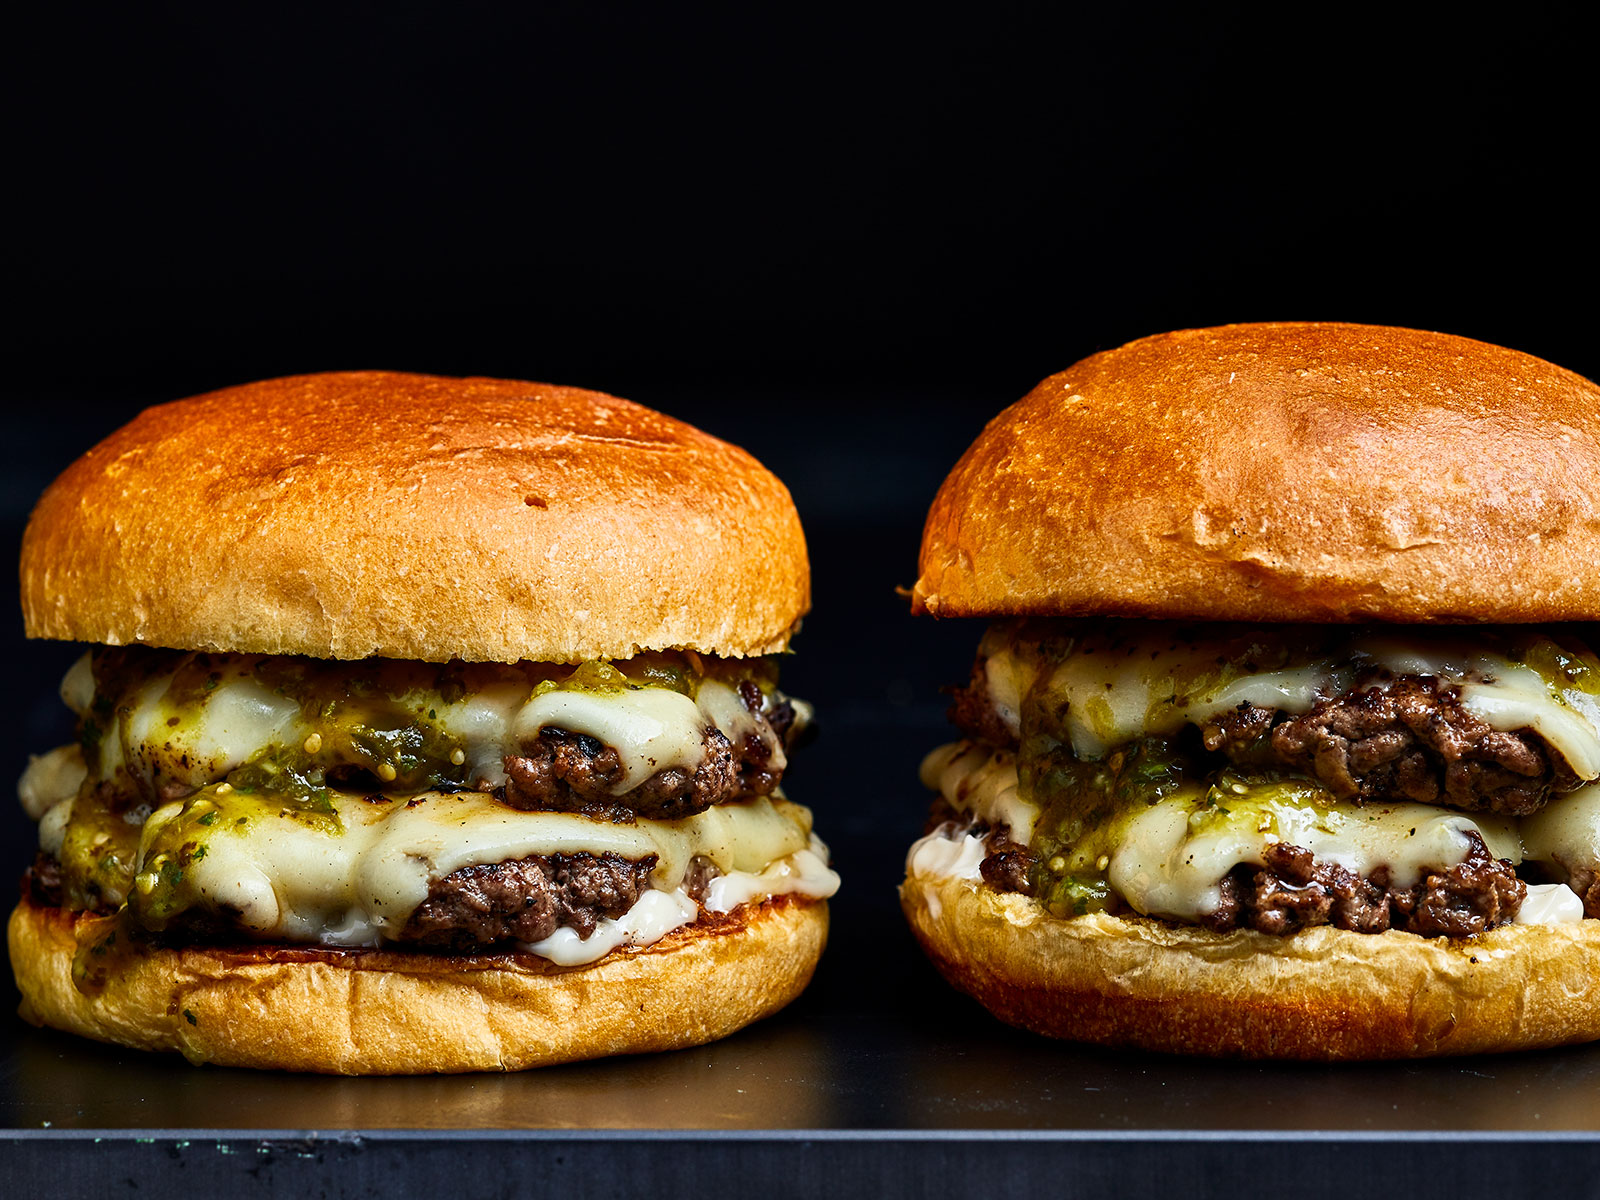 Qwil’s Food Guide: The Best Burgers in Hollywood